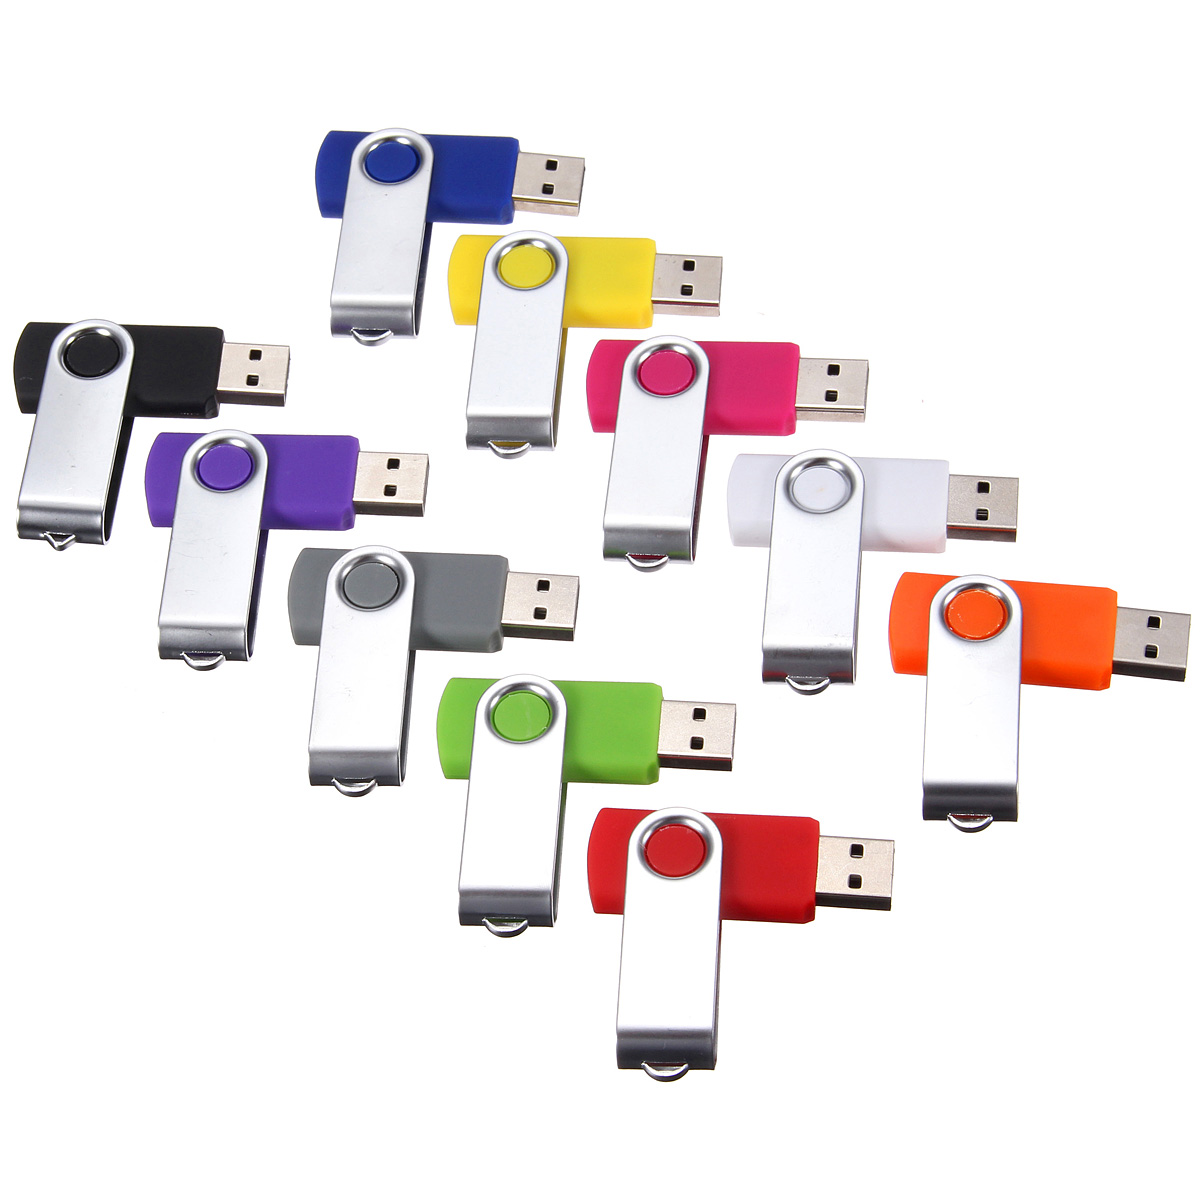 Find LOT 128MB USB 2 0 Flash Drive Memory Pen Stick Thumb Storage Gifts Pen Drive for Sale on Gipsybee.com with cryptocurrencies